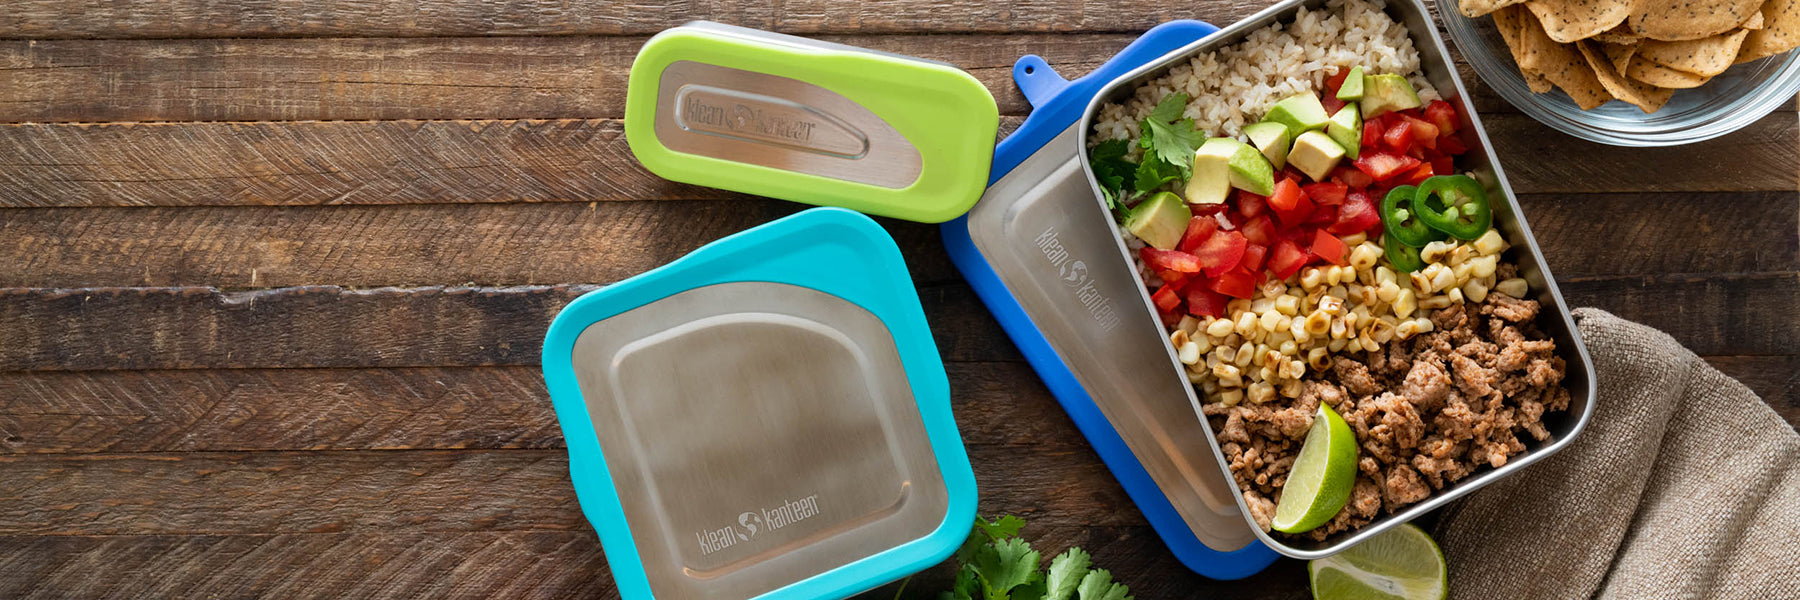 Lunch Boxes, Bento Boxes, Food Storage Containers | Klean Kanteen